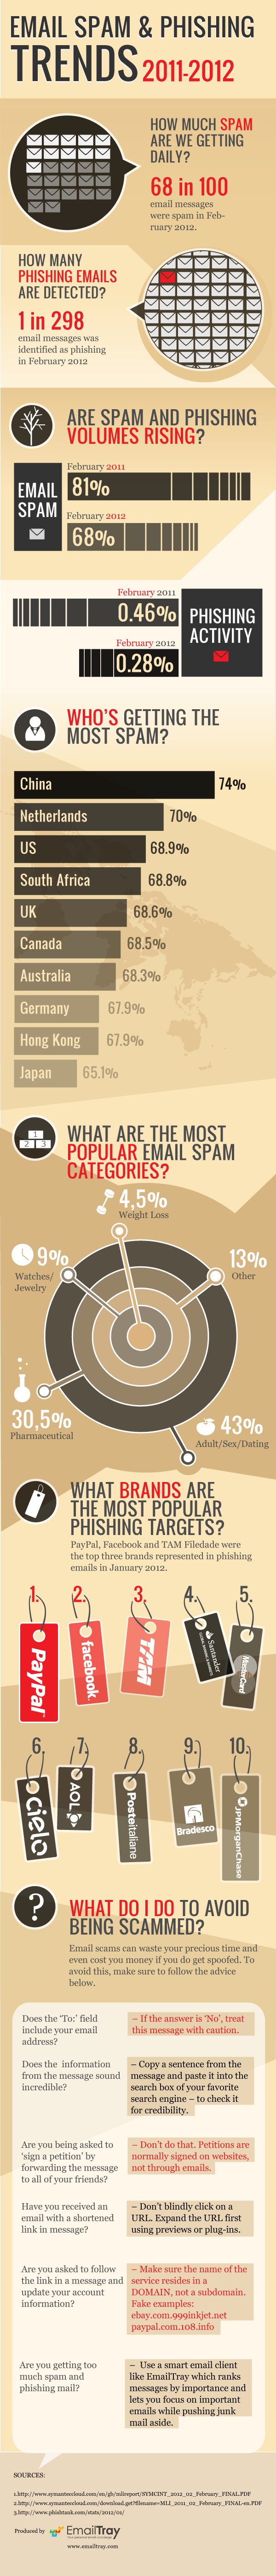 Email Spam and Phishing Trends 2011-2012